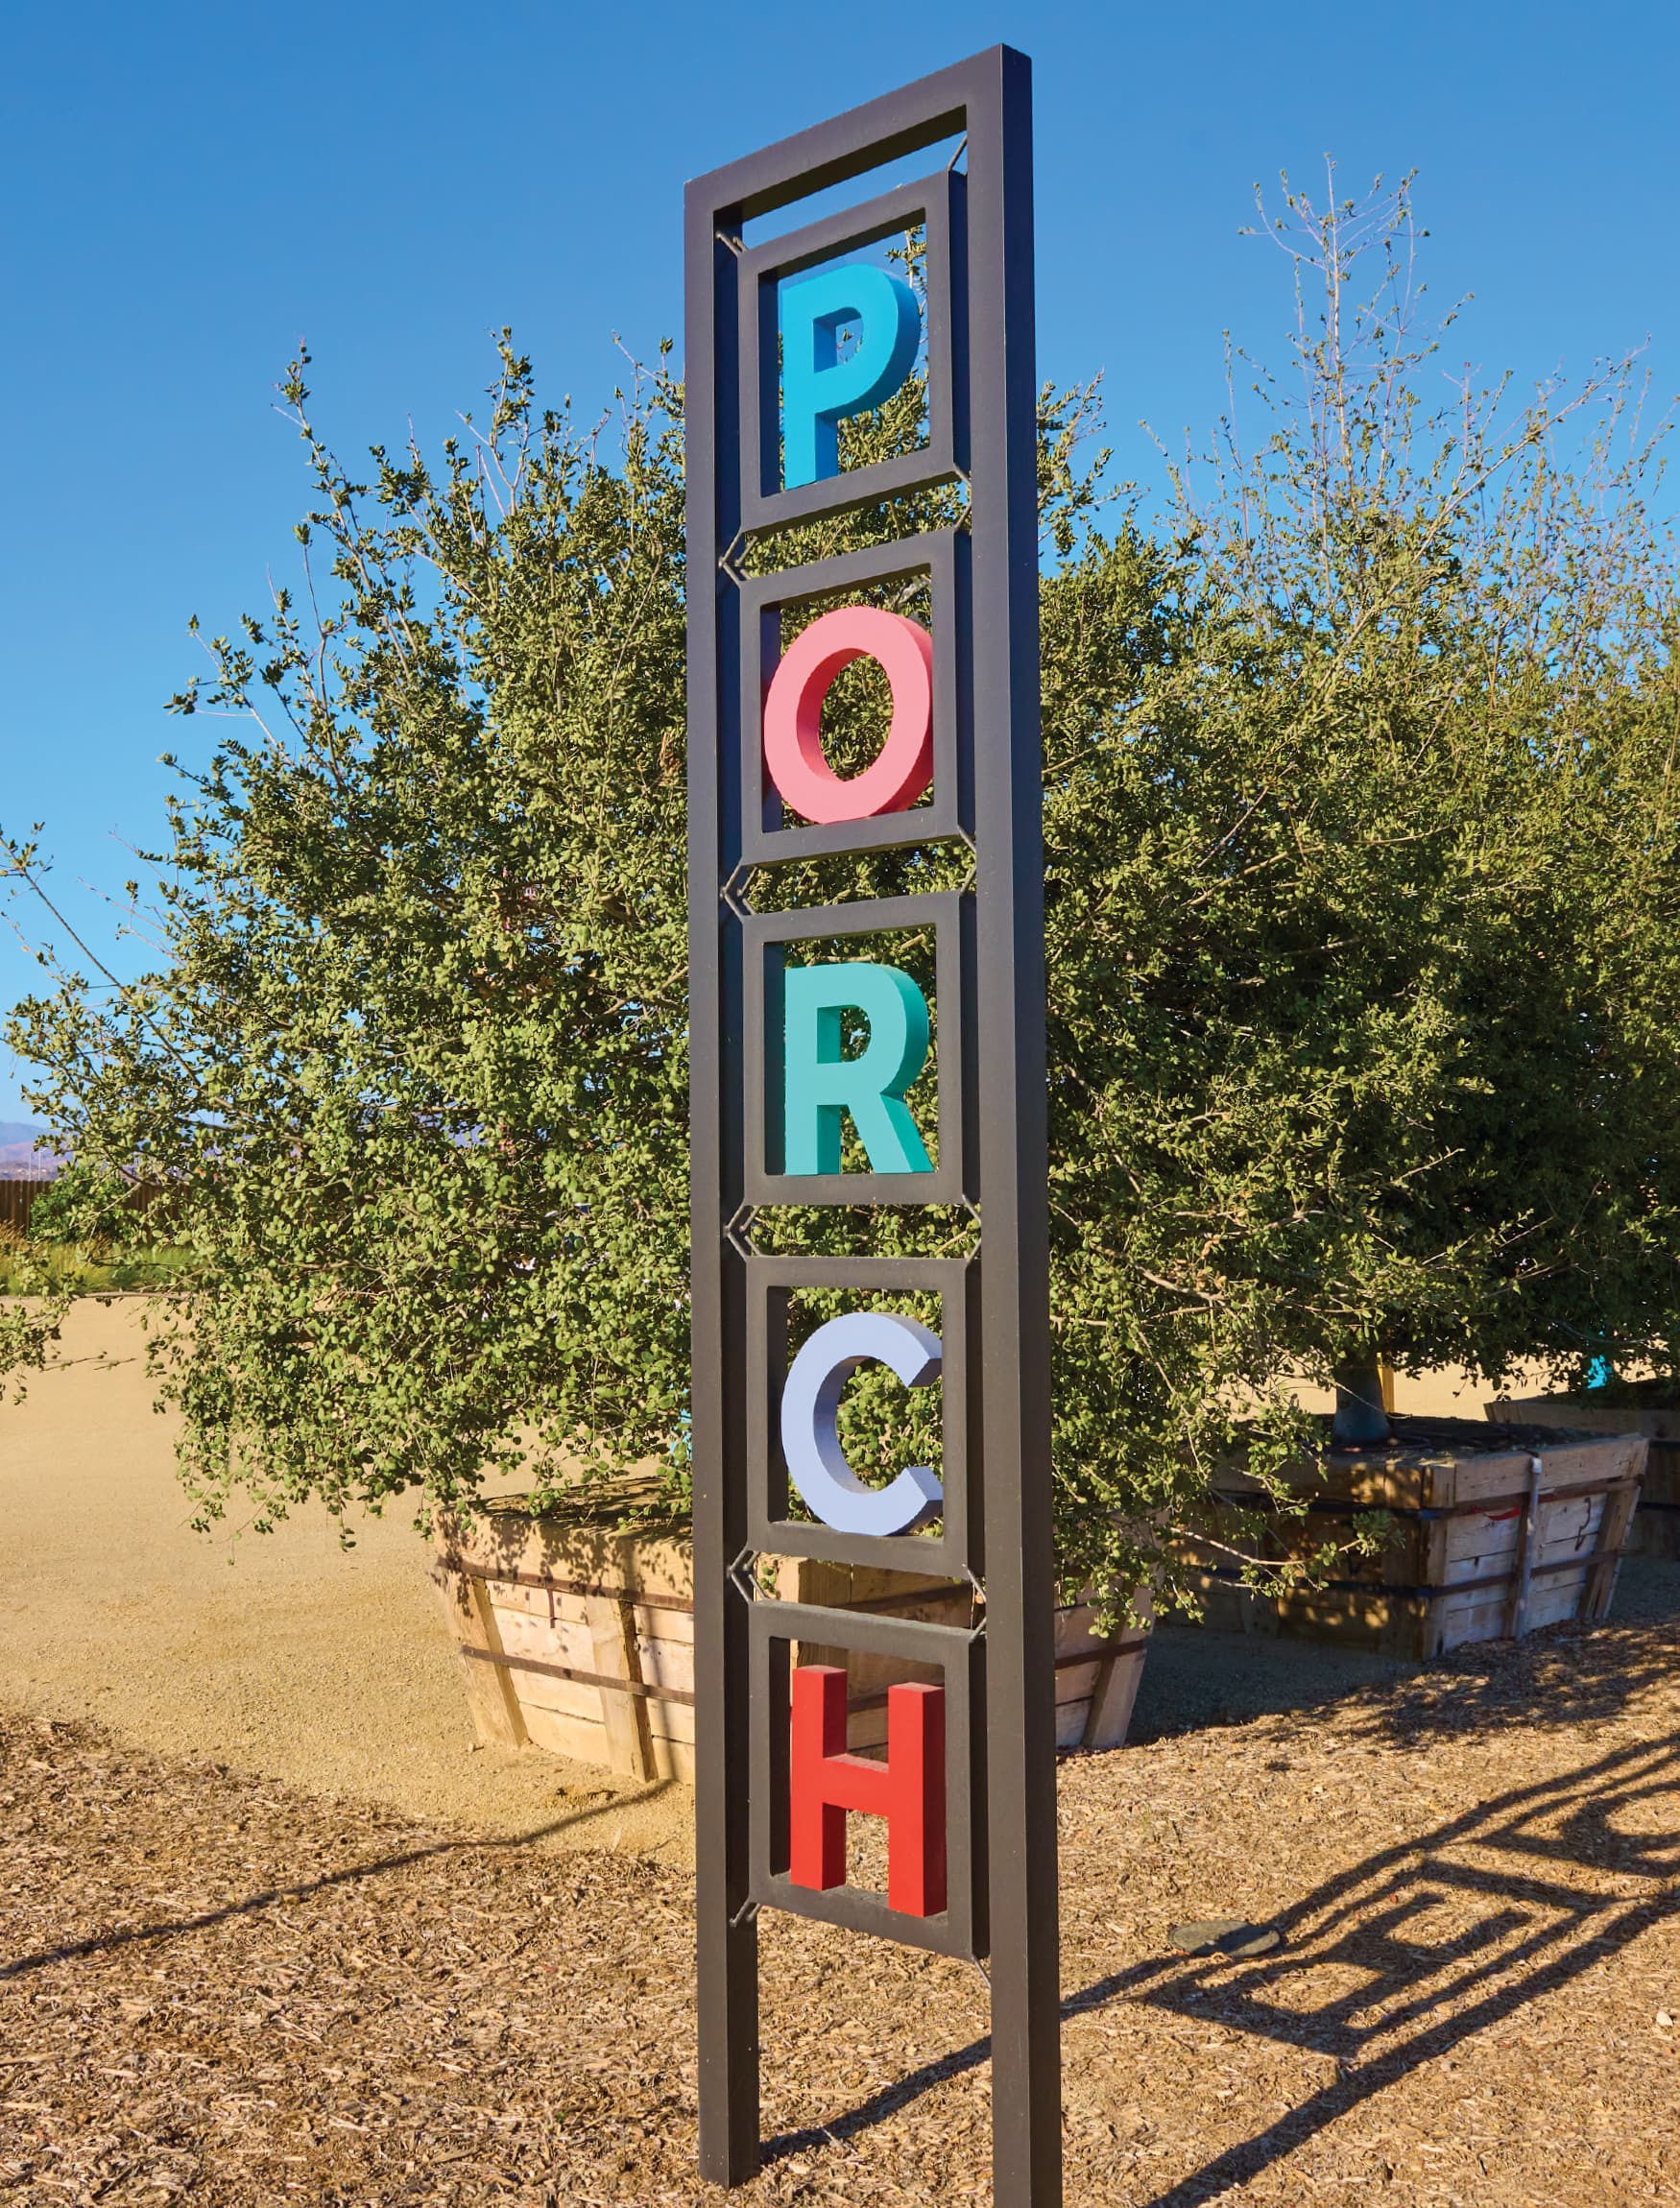 Vertical wayfinding identity signage for the Porch at Valencia. Designed by RSM Design. 